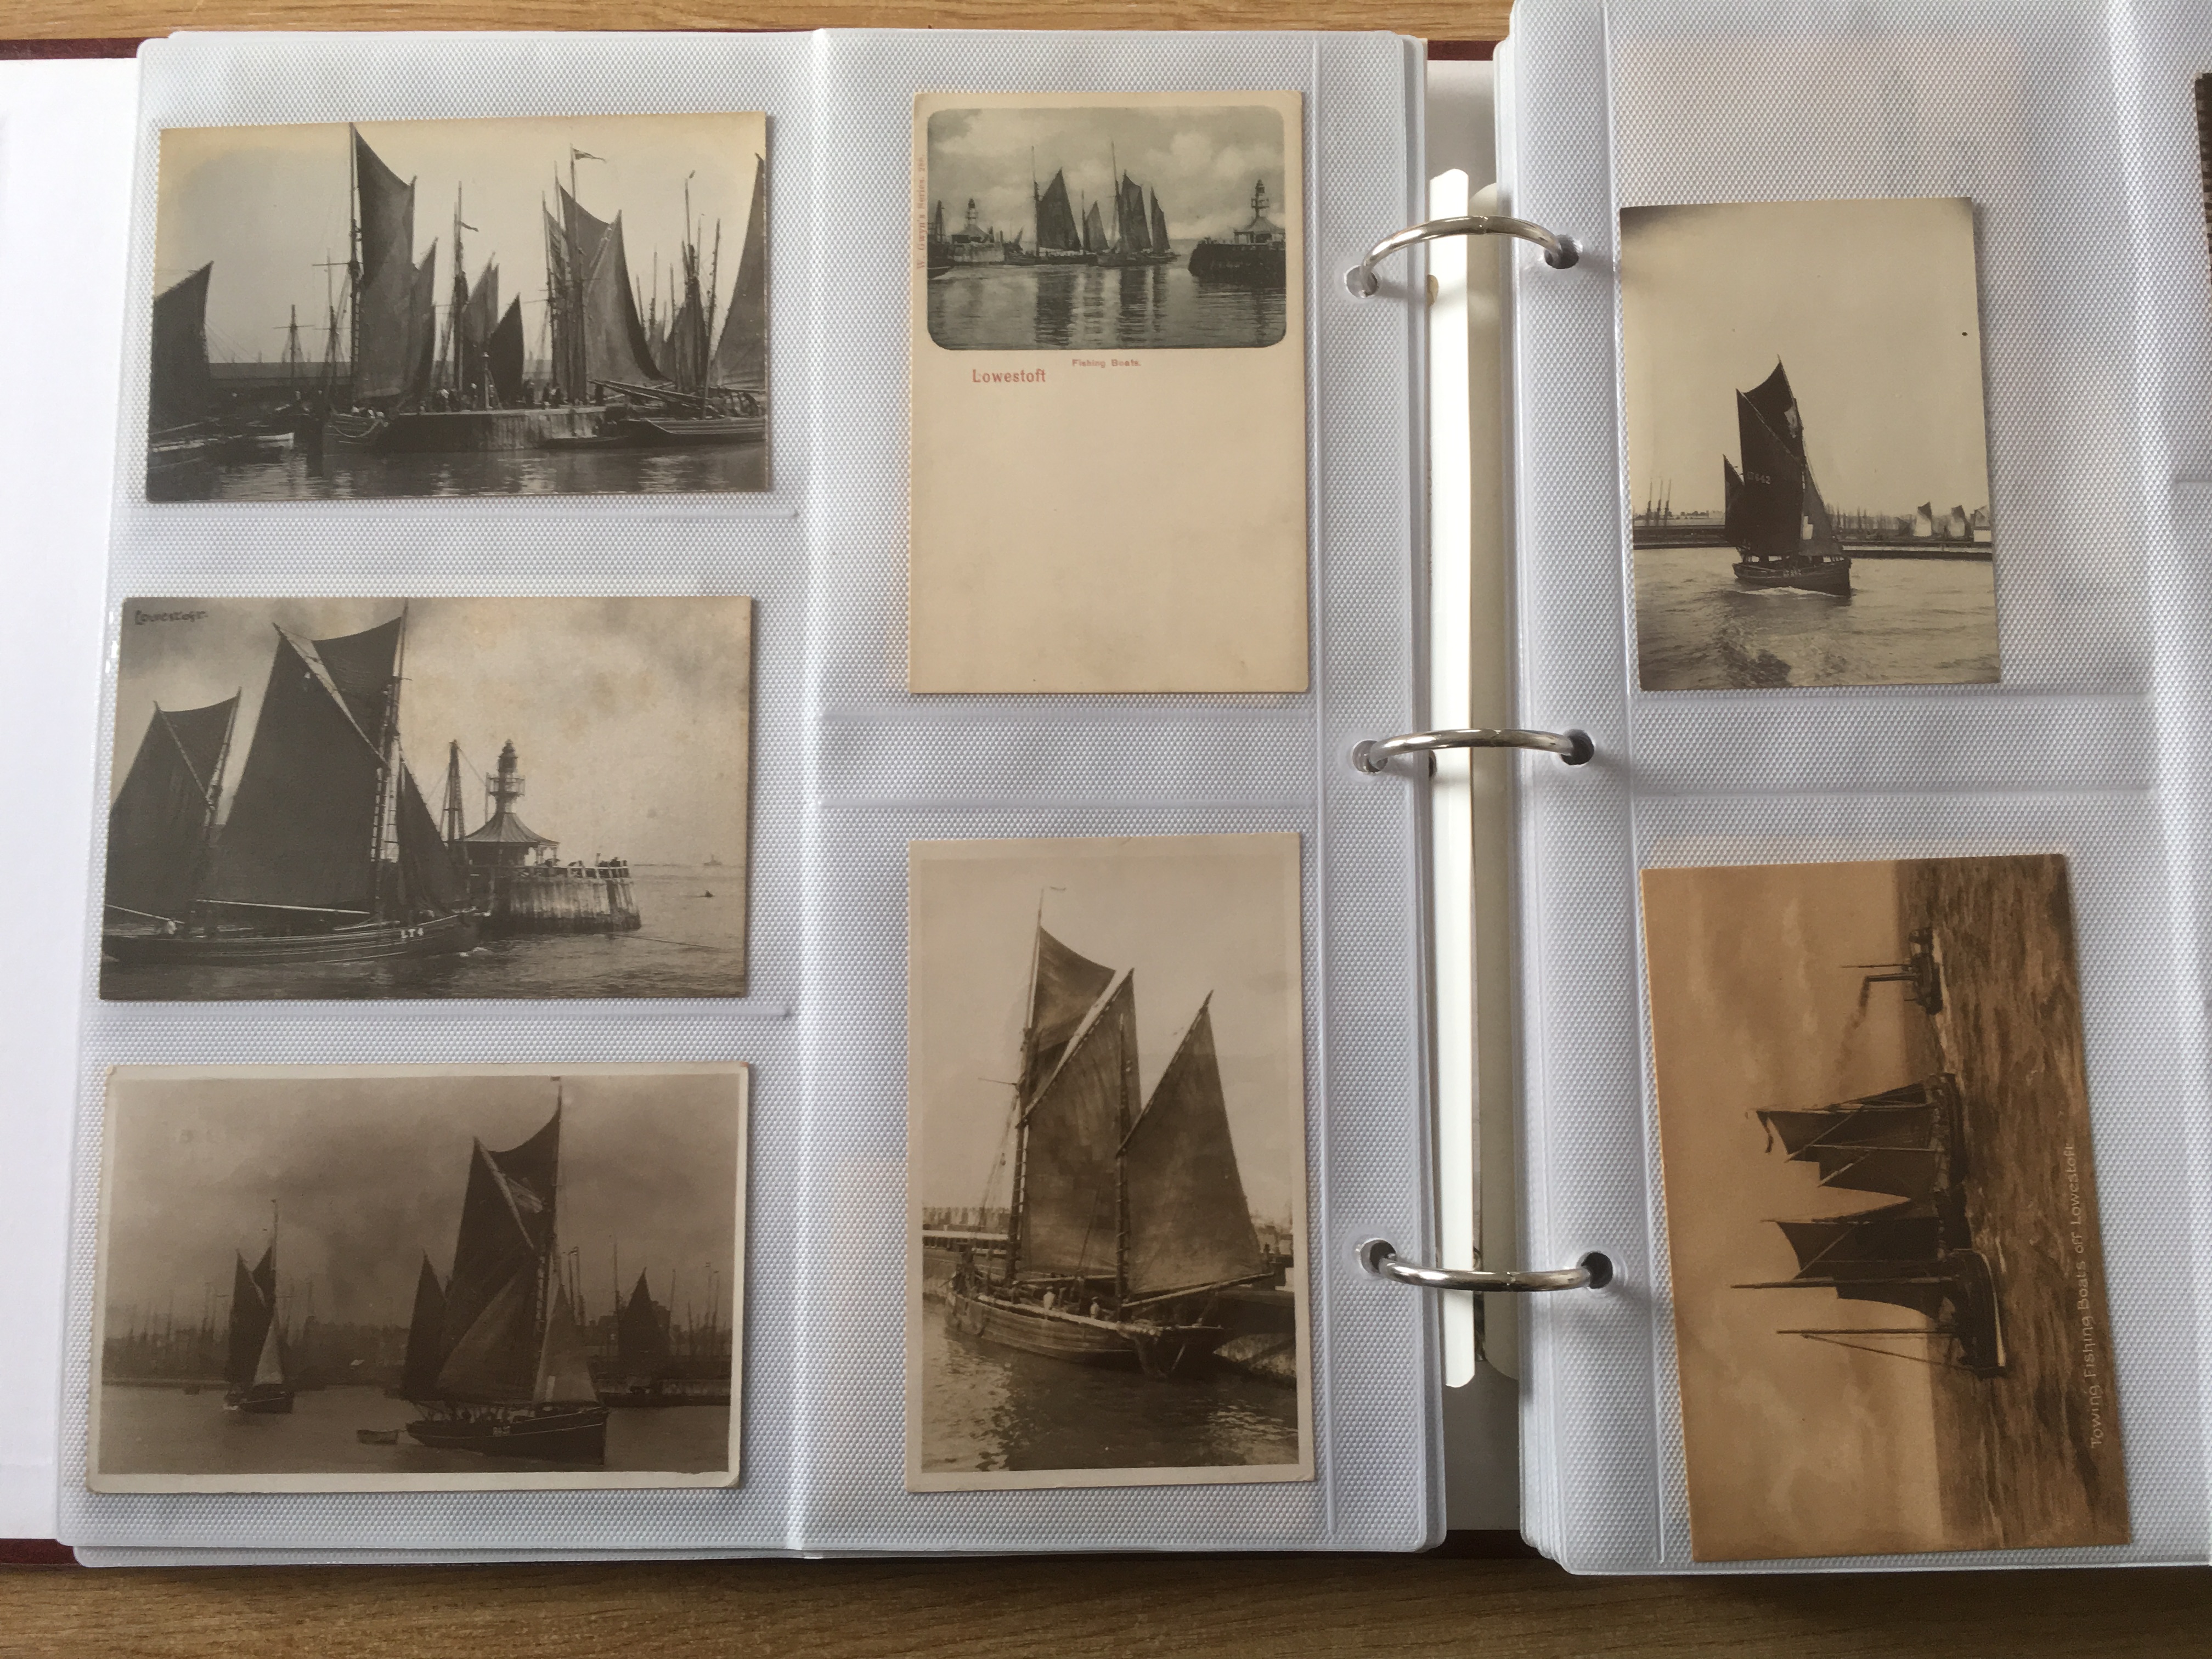 SUFFOLK: ALBUM WITH A COLLECTION OF LOWESTOFT FISHING INDUSTRY POSTCARDS AND A FEW PHOTOS. - Image 6 of 8